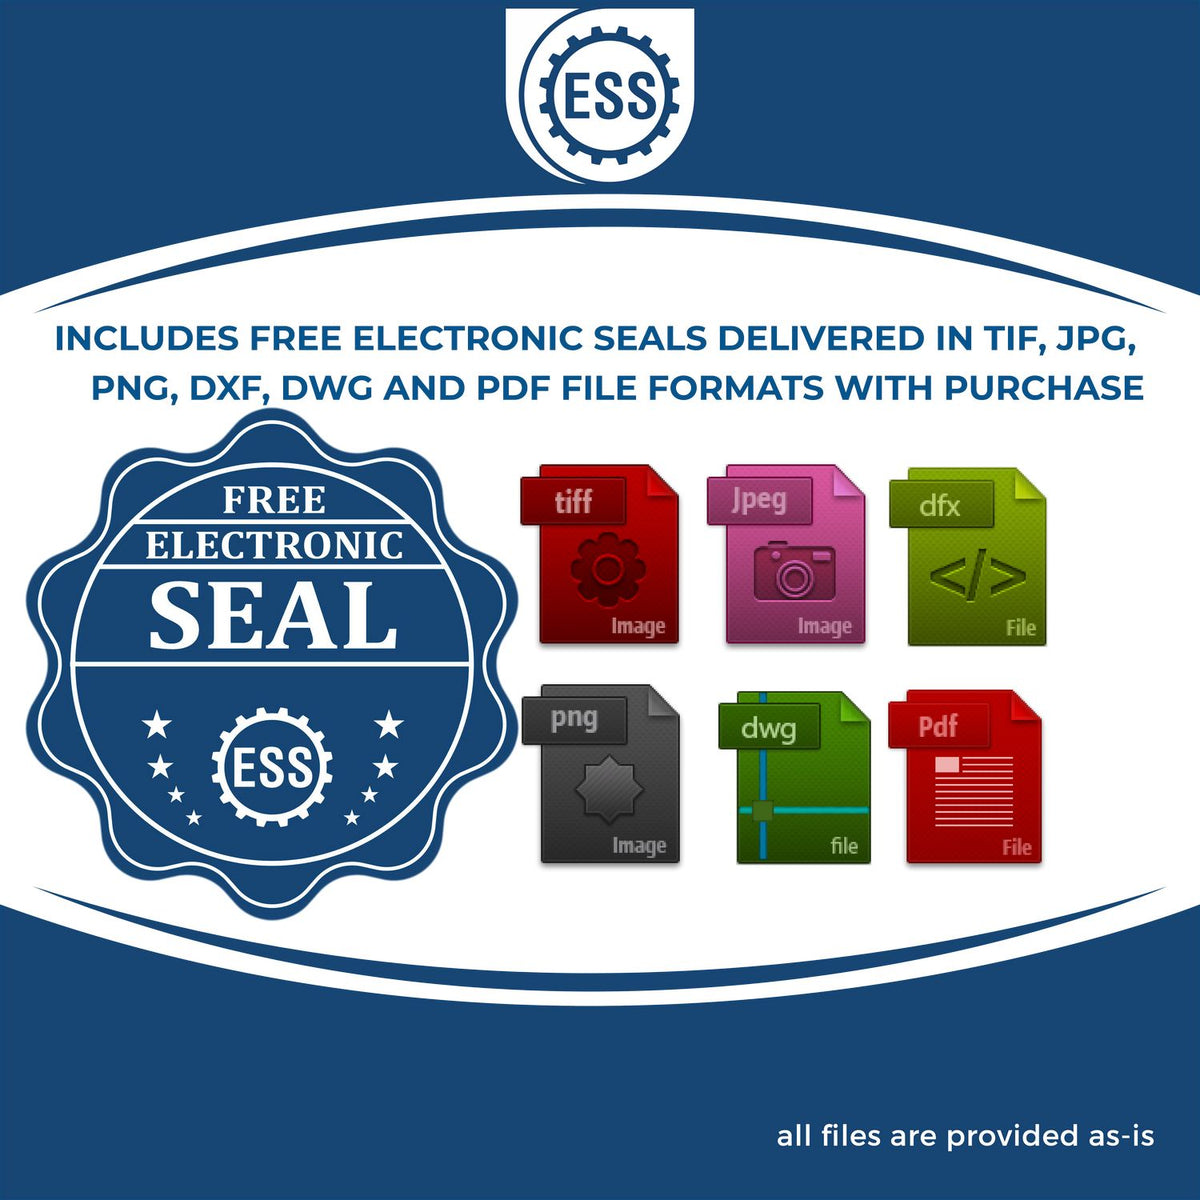 An infographic for the free electronic seal for the Hybrid Nebraska Engineer Seal illustrating the different file type icons such as DXF, DWG, TIF, JPG and PNG.